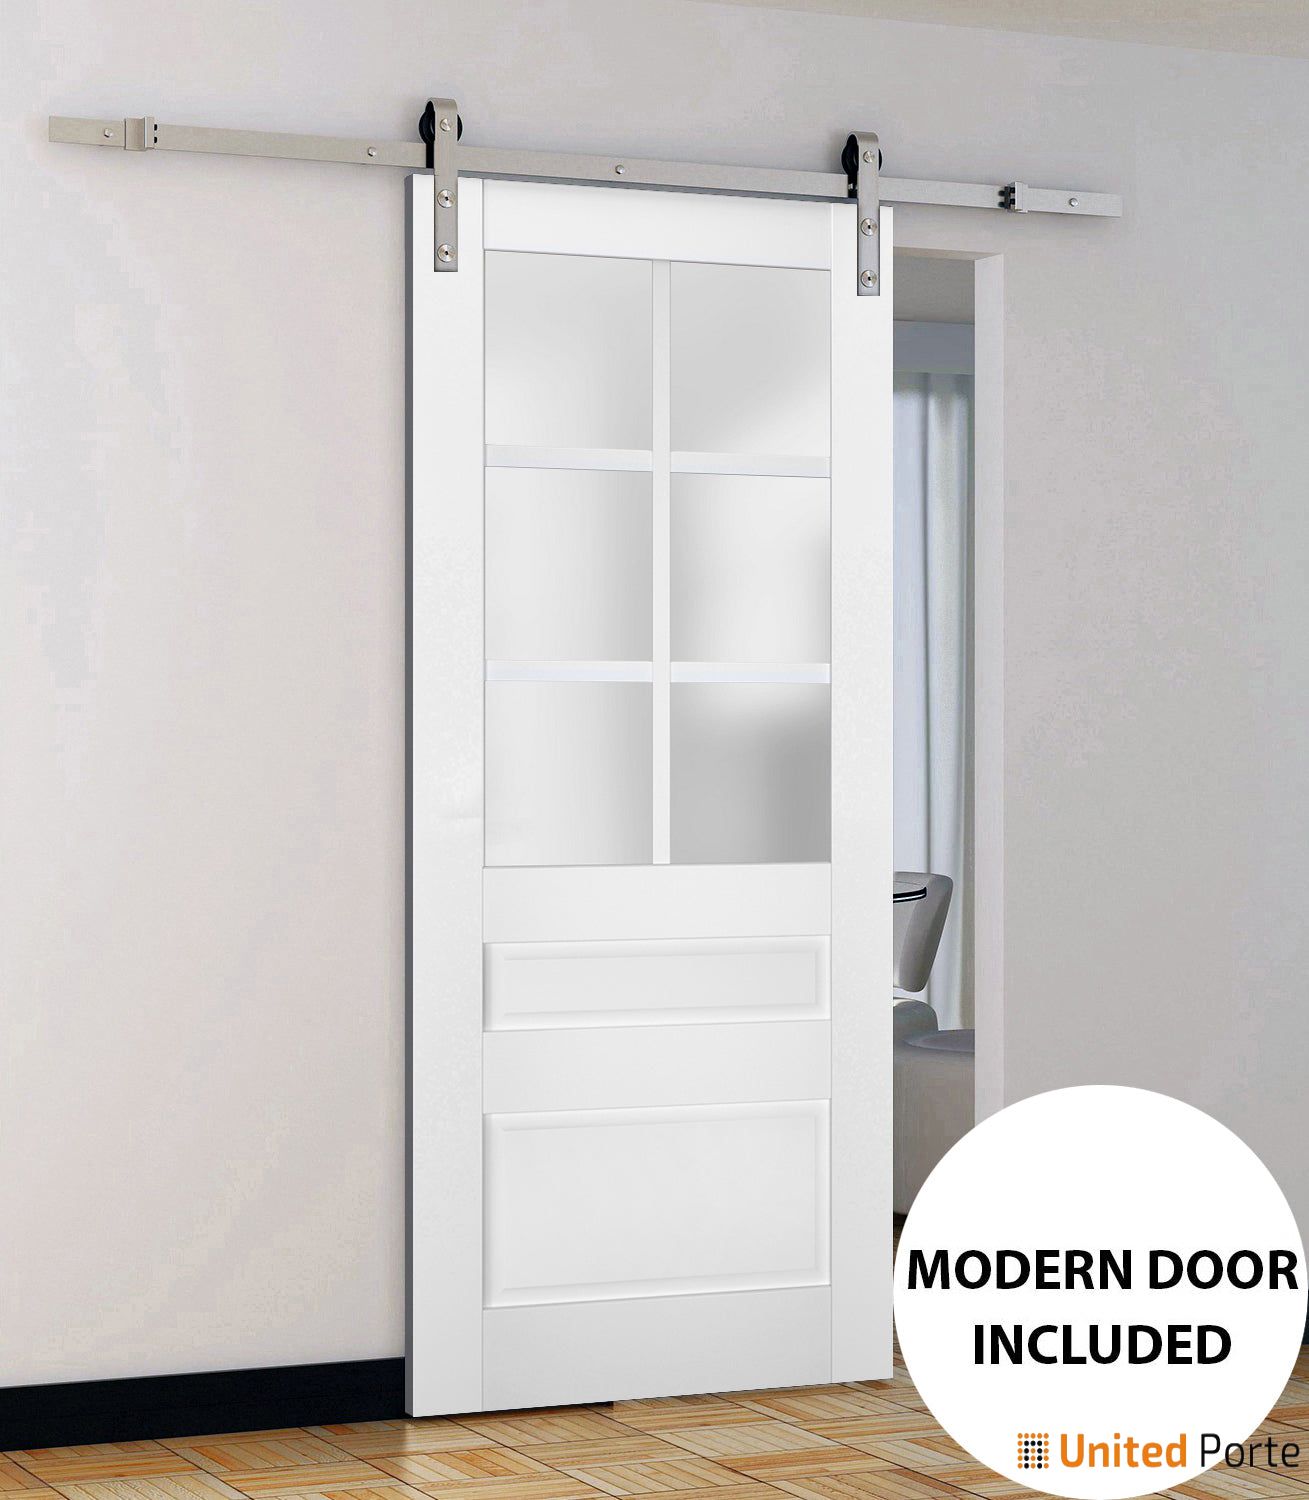 Veregio 7339 Matte White Barn Door with Frosted Glass and Silver Finish Rail